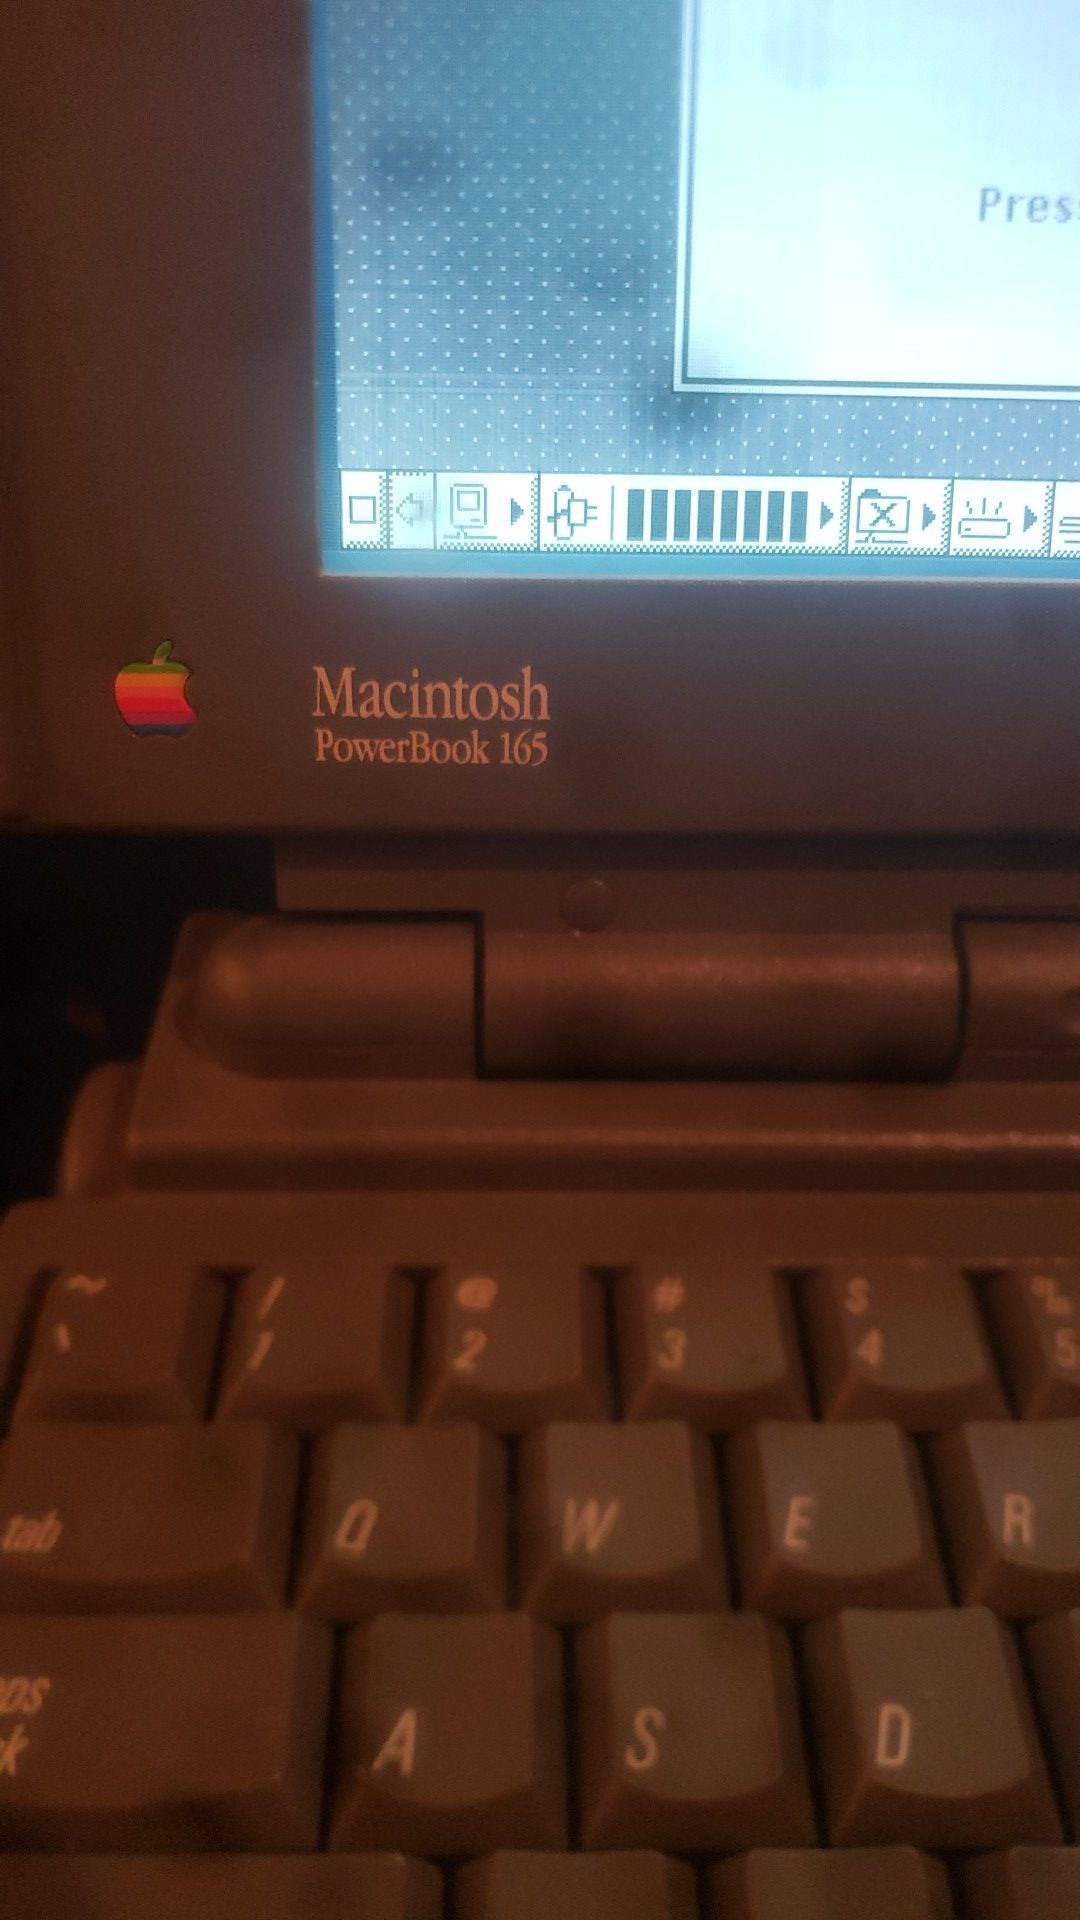 Macintosh powerBook 165 this little pc is a part of Apple computers history.